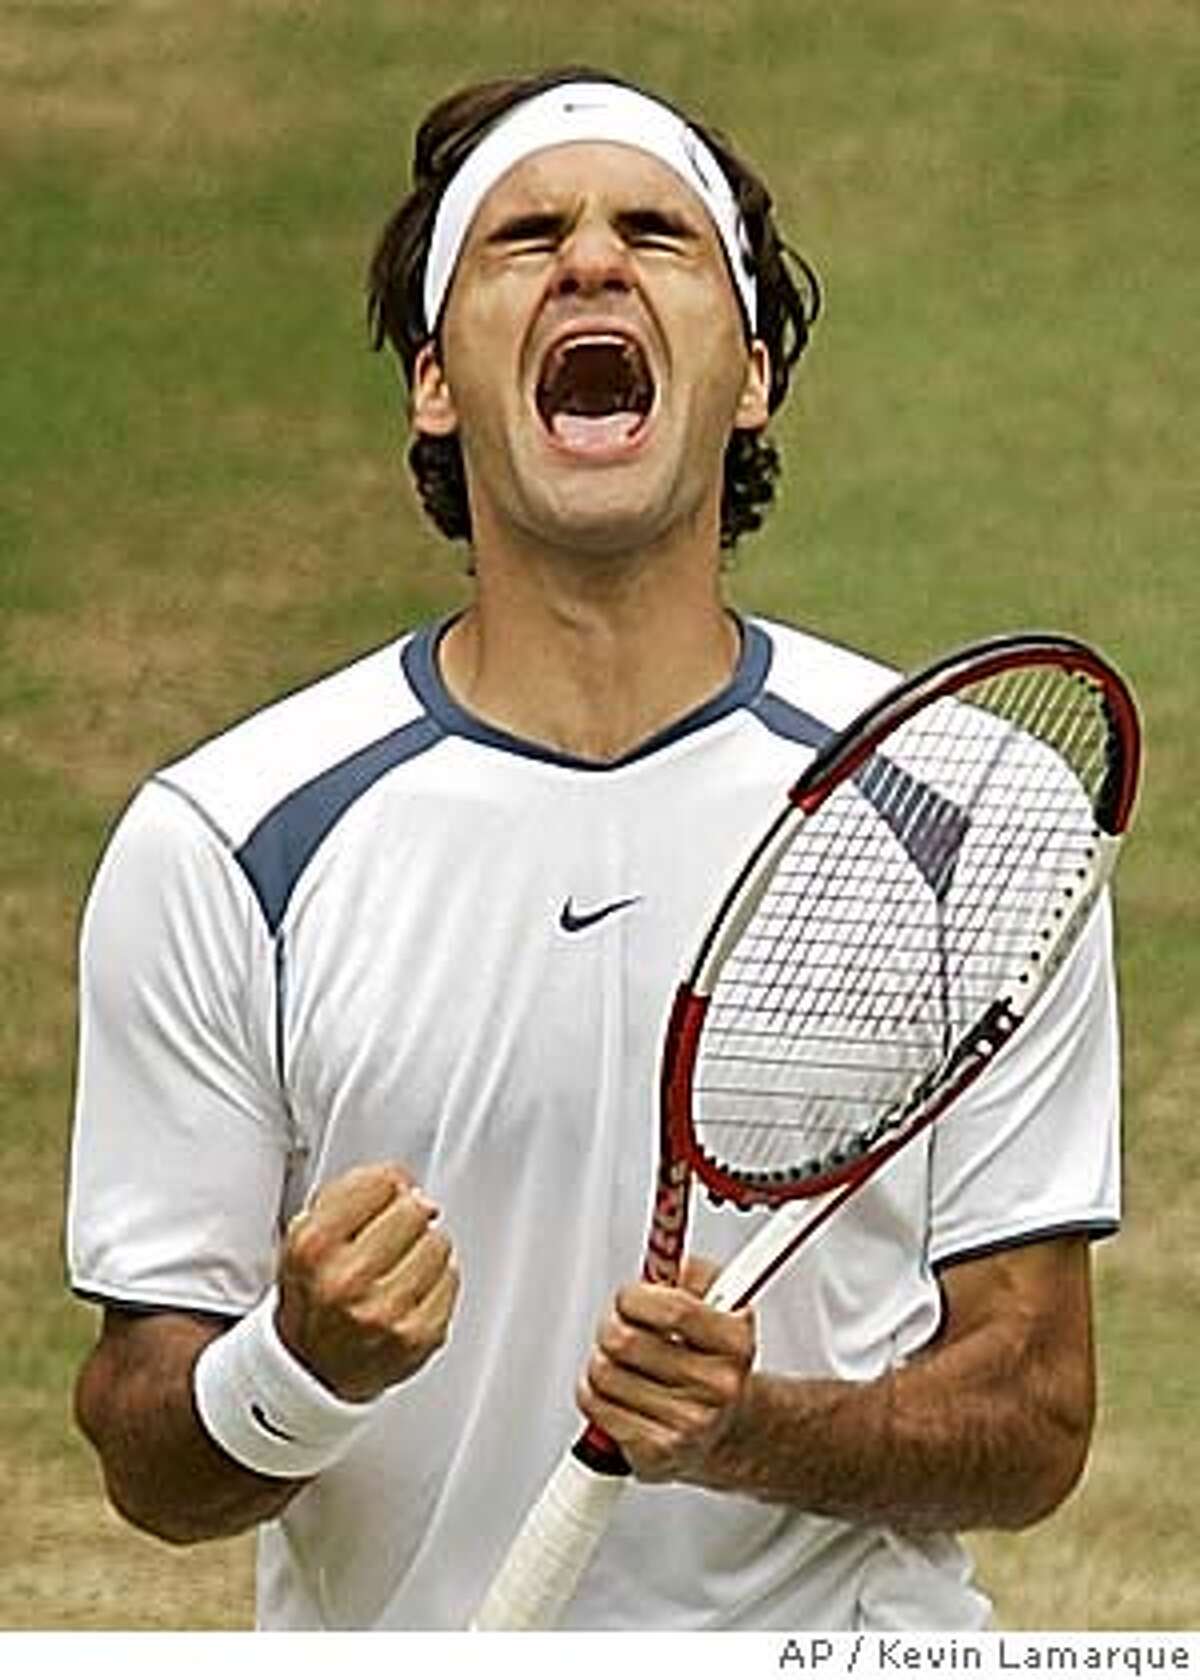 Defending champion Roger Federer reacts as he defeats Andy Roddick to win the Men's Singles final on the Centre Court at Wimbledon, Sunday June 3, 2005.(AP Photo/Kevin Lamarque, pool) POOL